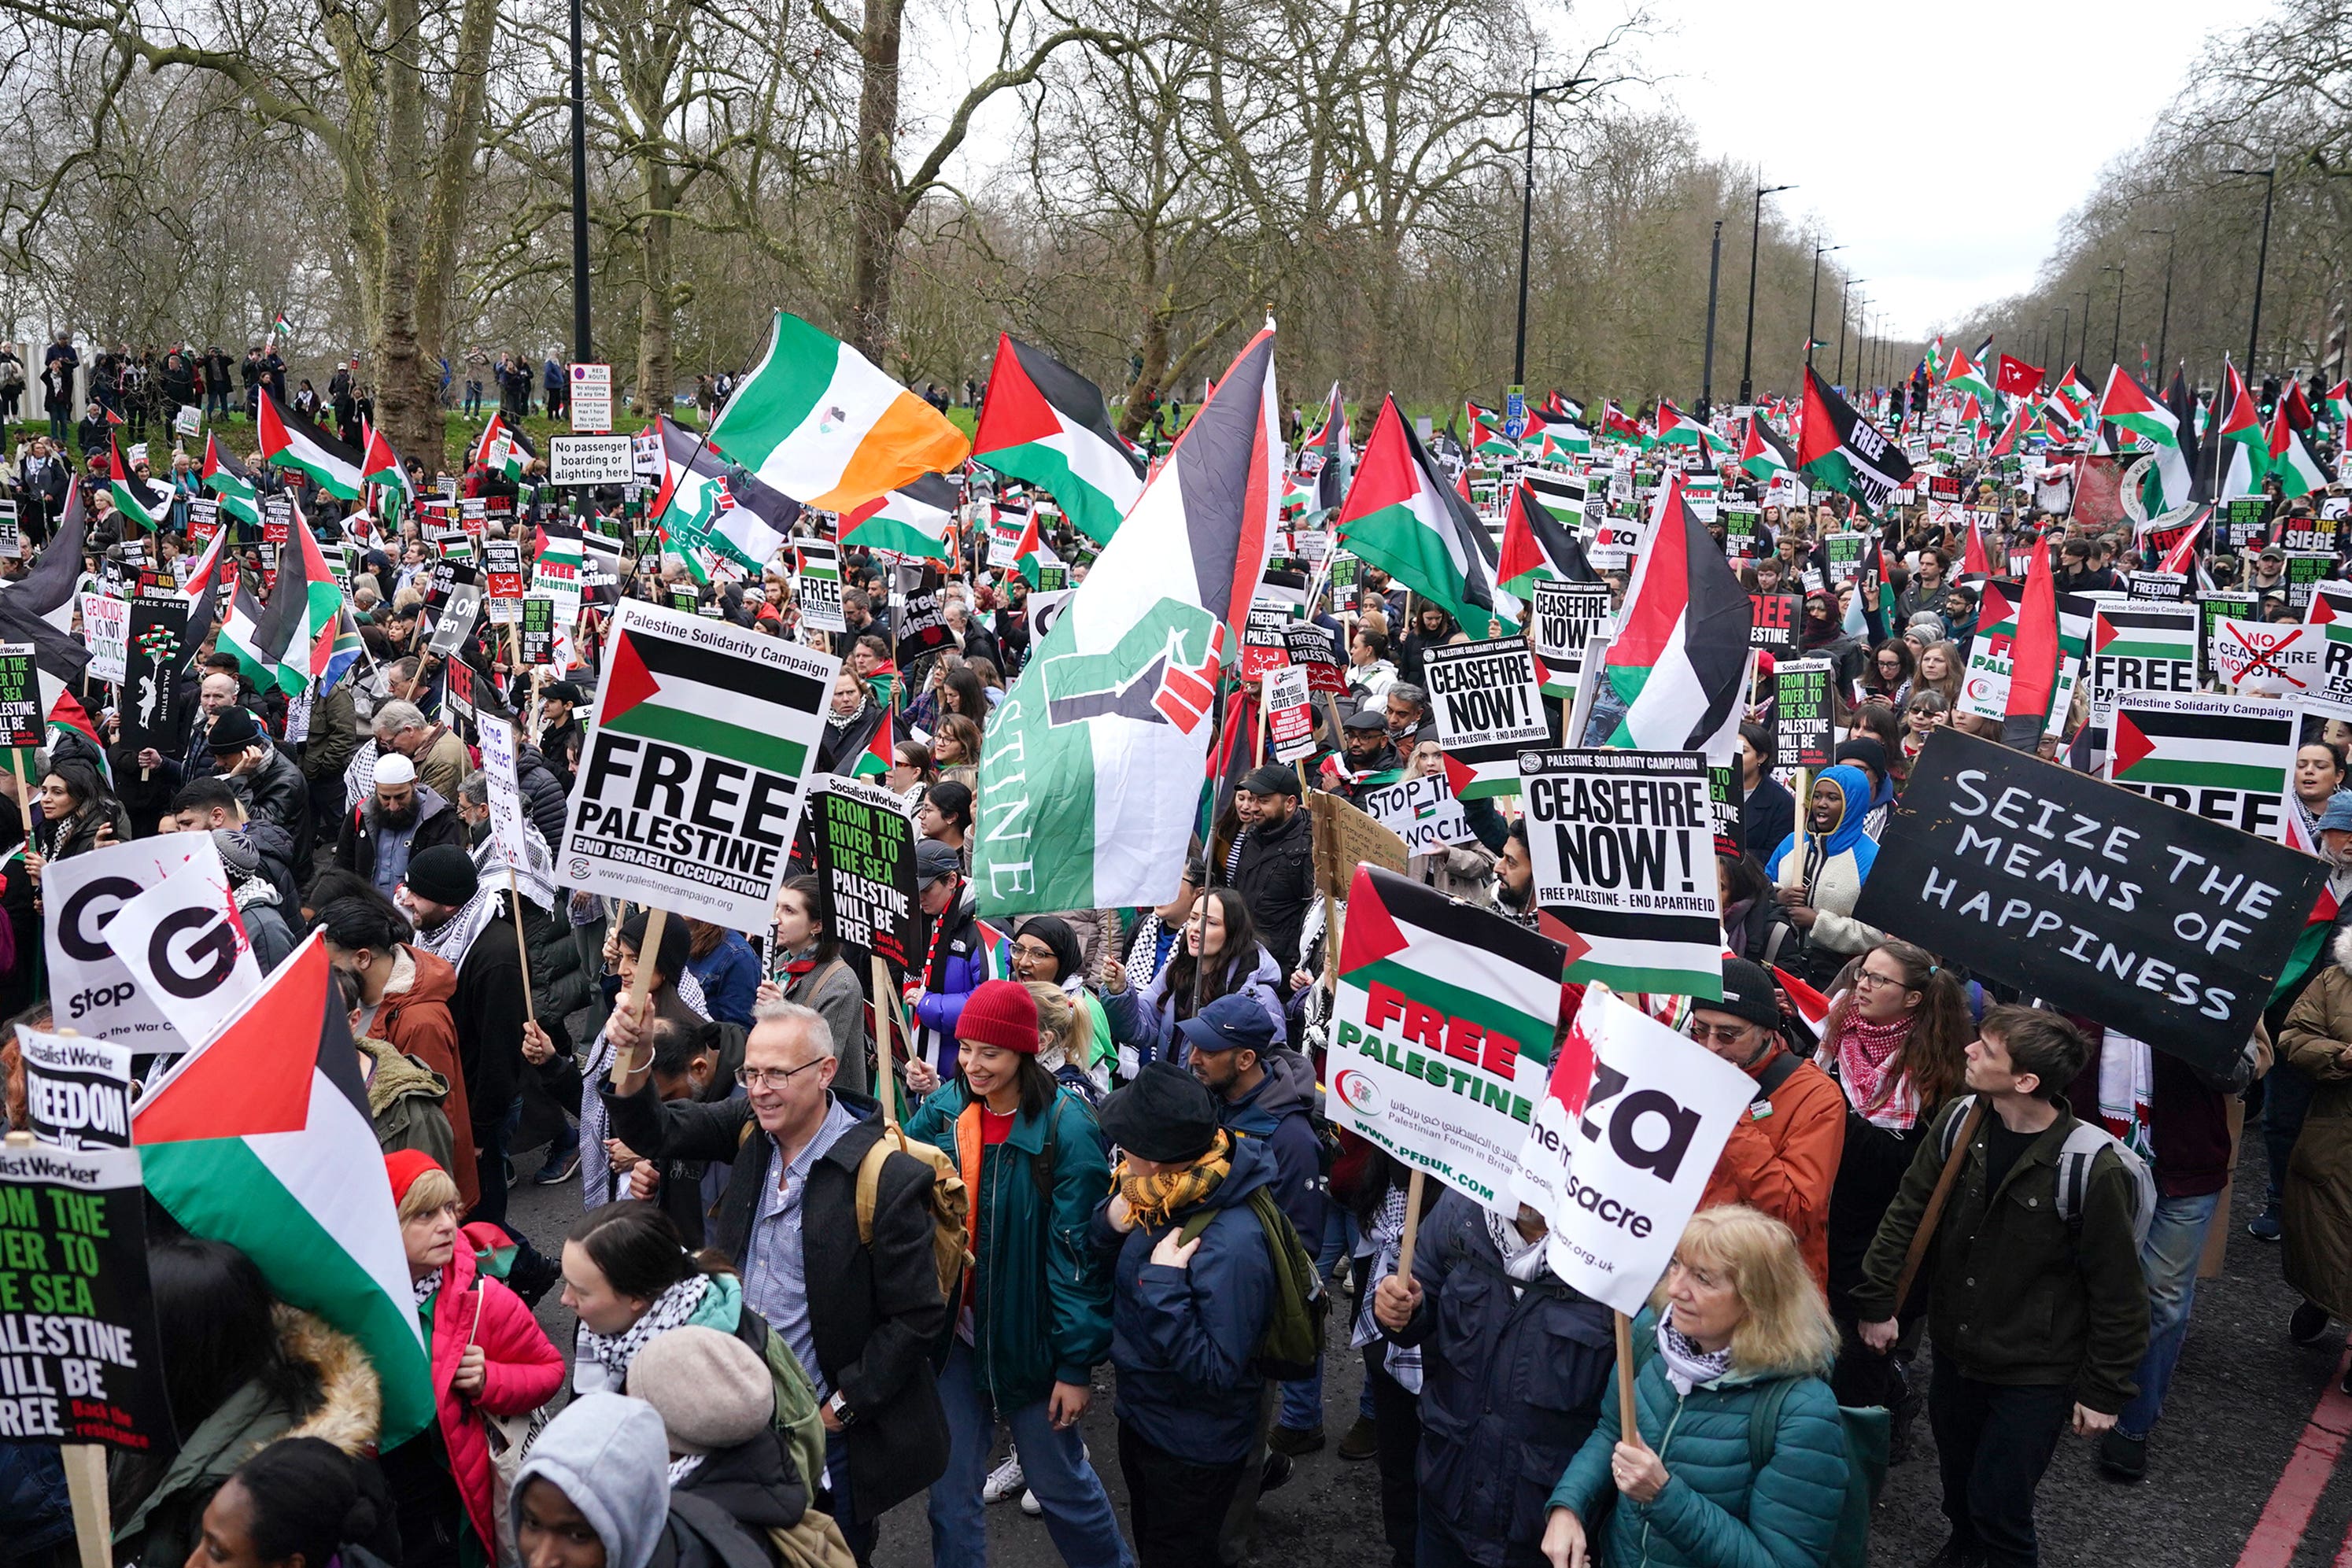 The Israel/Hamas conflict has spilled over into the UK’s domestic politics as protesters demand the government back an immediate ceasefire in the region